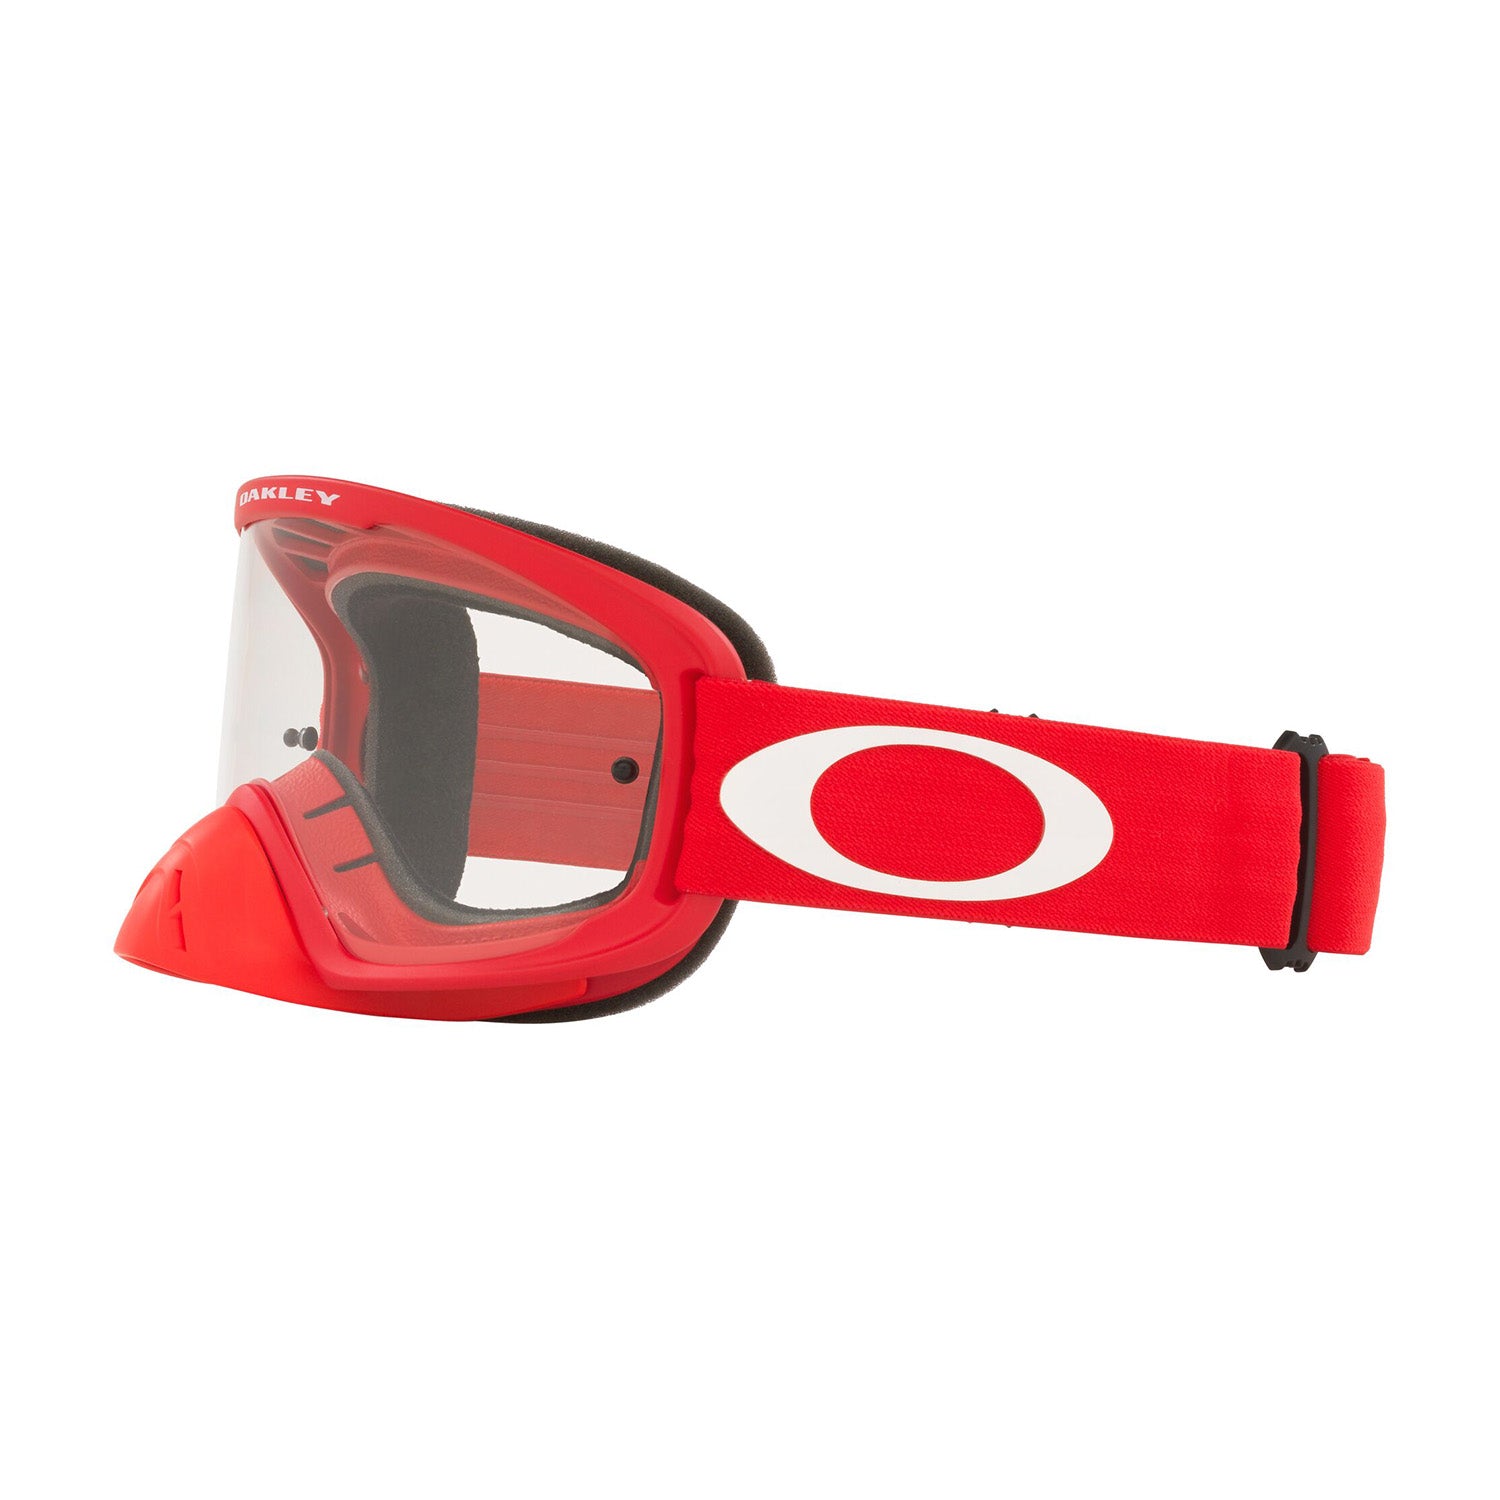 Oakley O Frame 2.0 Pro MX Goggle Moto Red - Clear Lens